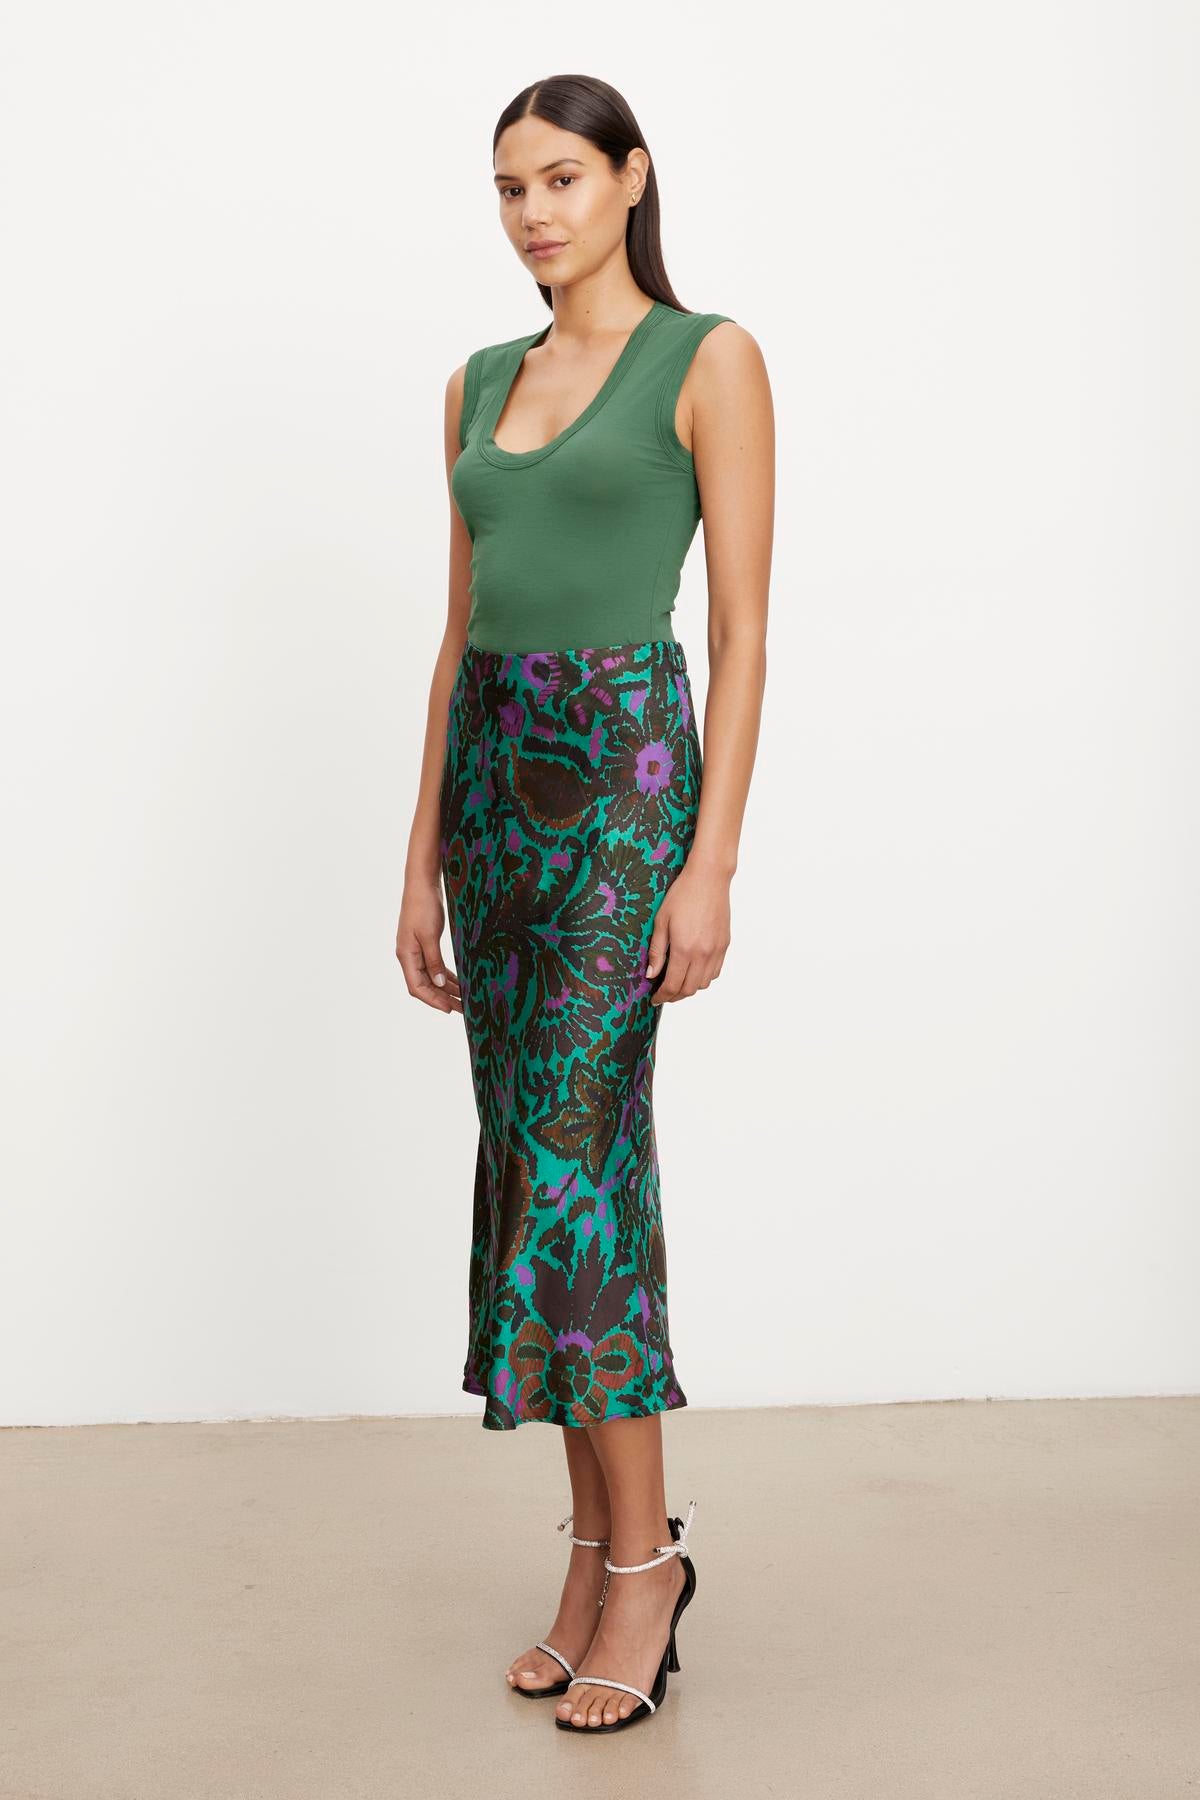 The model is wearing a green top and Velvet by Graham & Spencer's KAIYA PRINTED SKIRT with an elastic waist, creating an A-line silhouette.-36094331093185